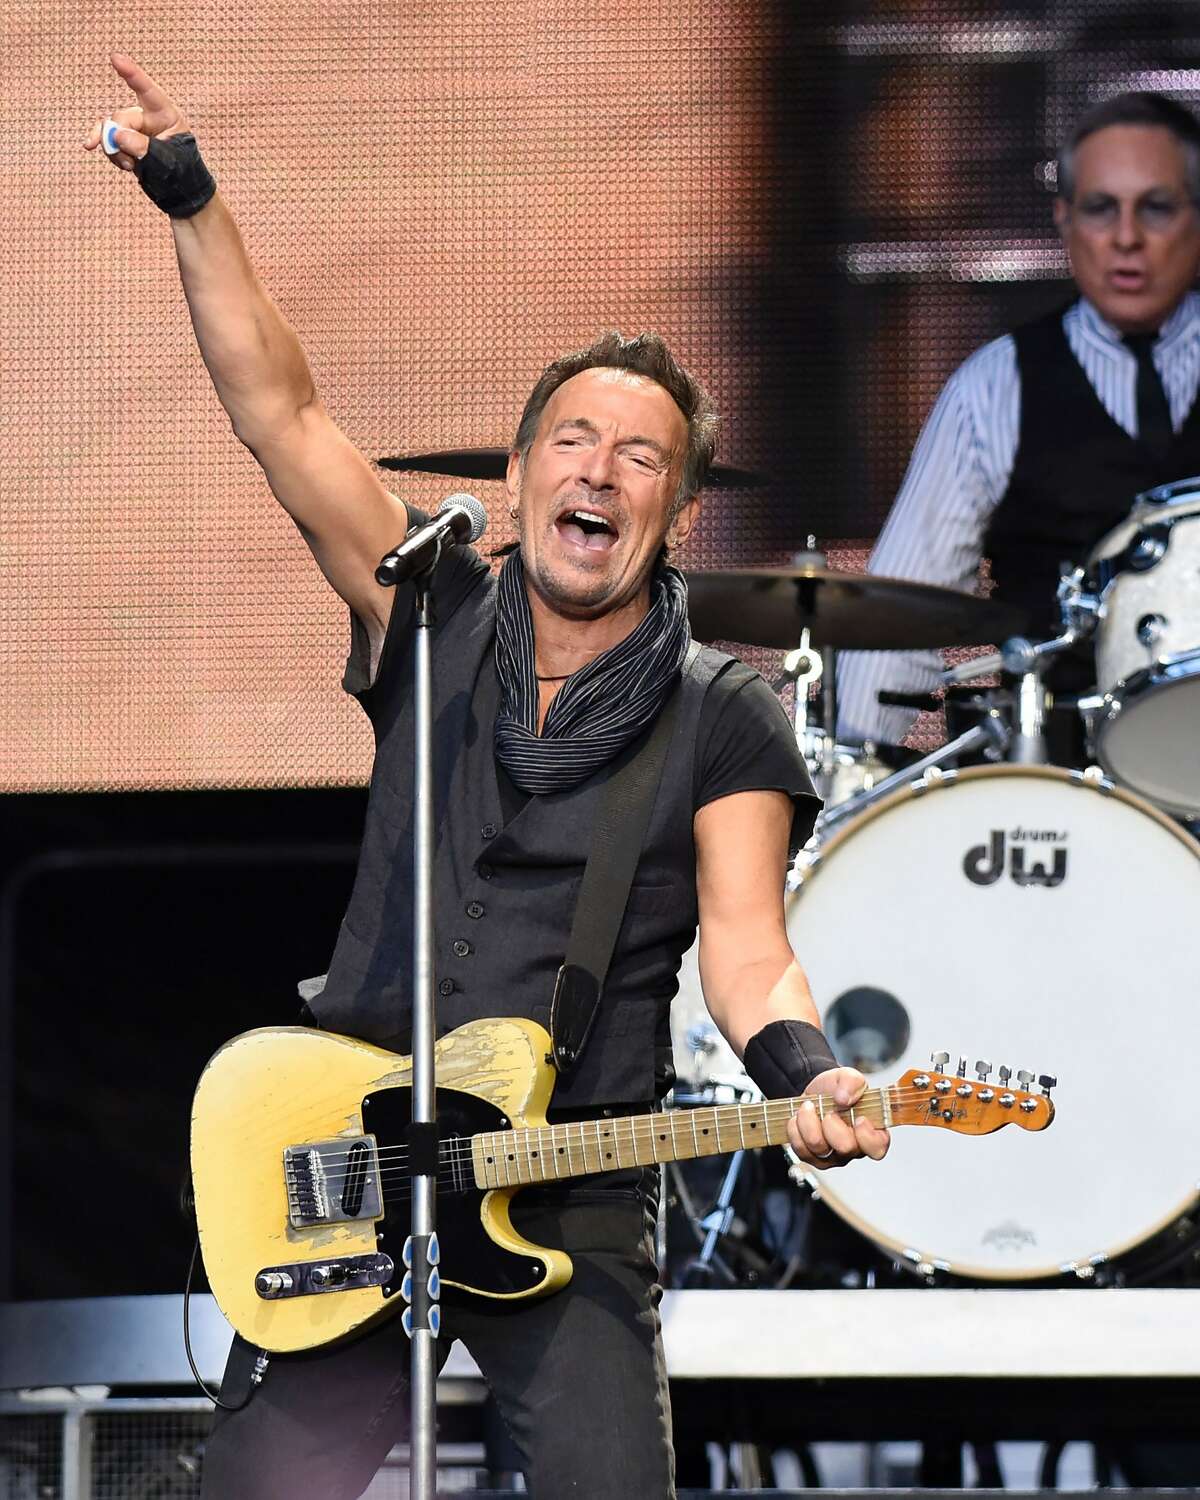 US singer Bruce Springsteen performs on stage during "The river Tour 2016" in the northern Spanish Basque city of San Sebastian on May 17, 2016. / AFP PHOTO / ANDER GILLENEAANDER GILLENEA/AFP/Getty Images